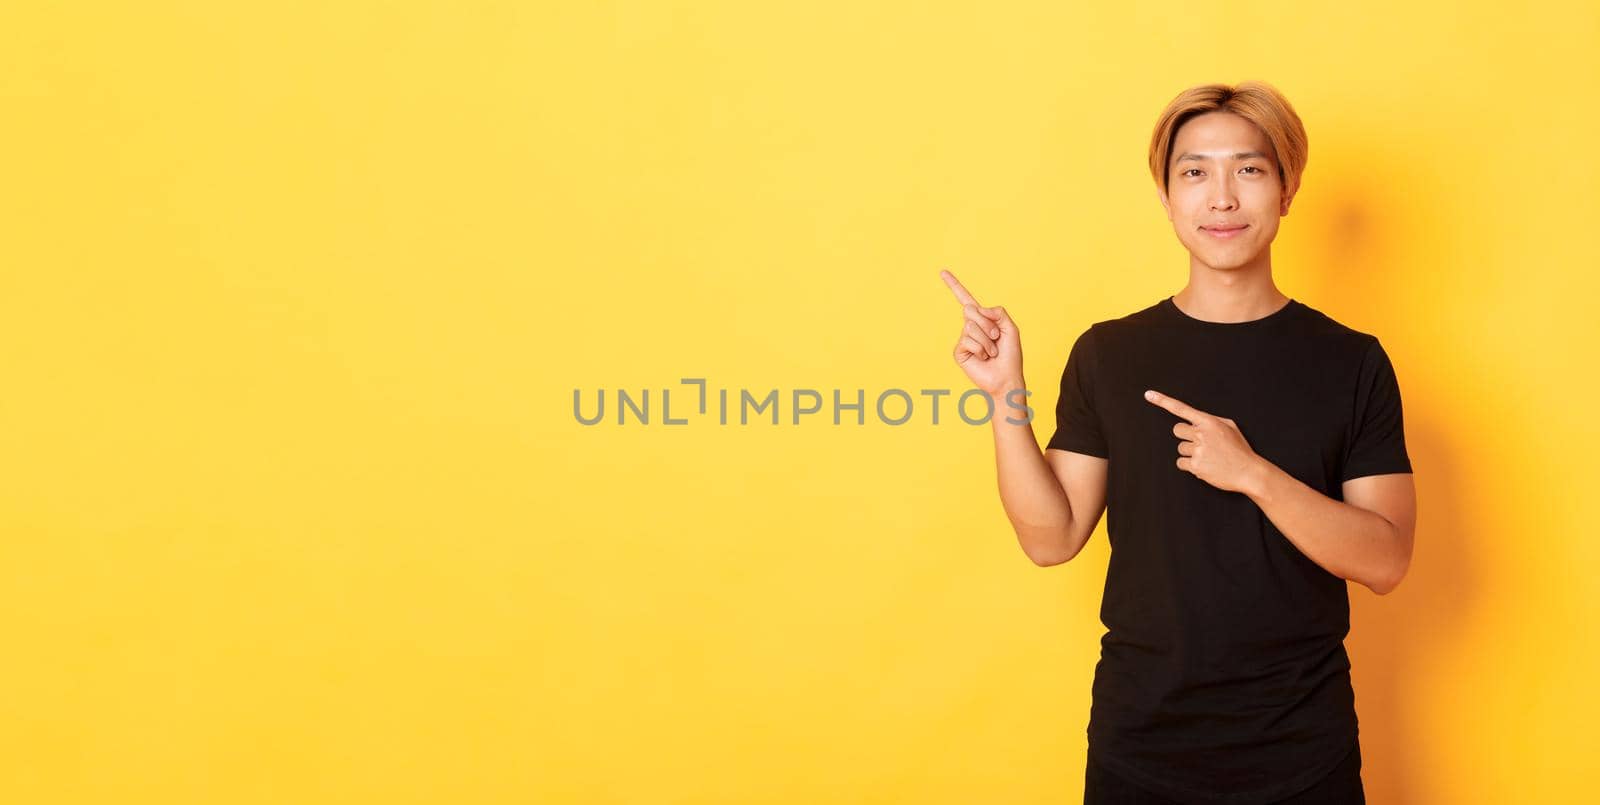 Portrait of smiling handsome asian man in black t-shirt pointing fingers upper left corner, showing logo or banner, yellow background.